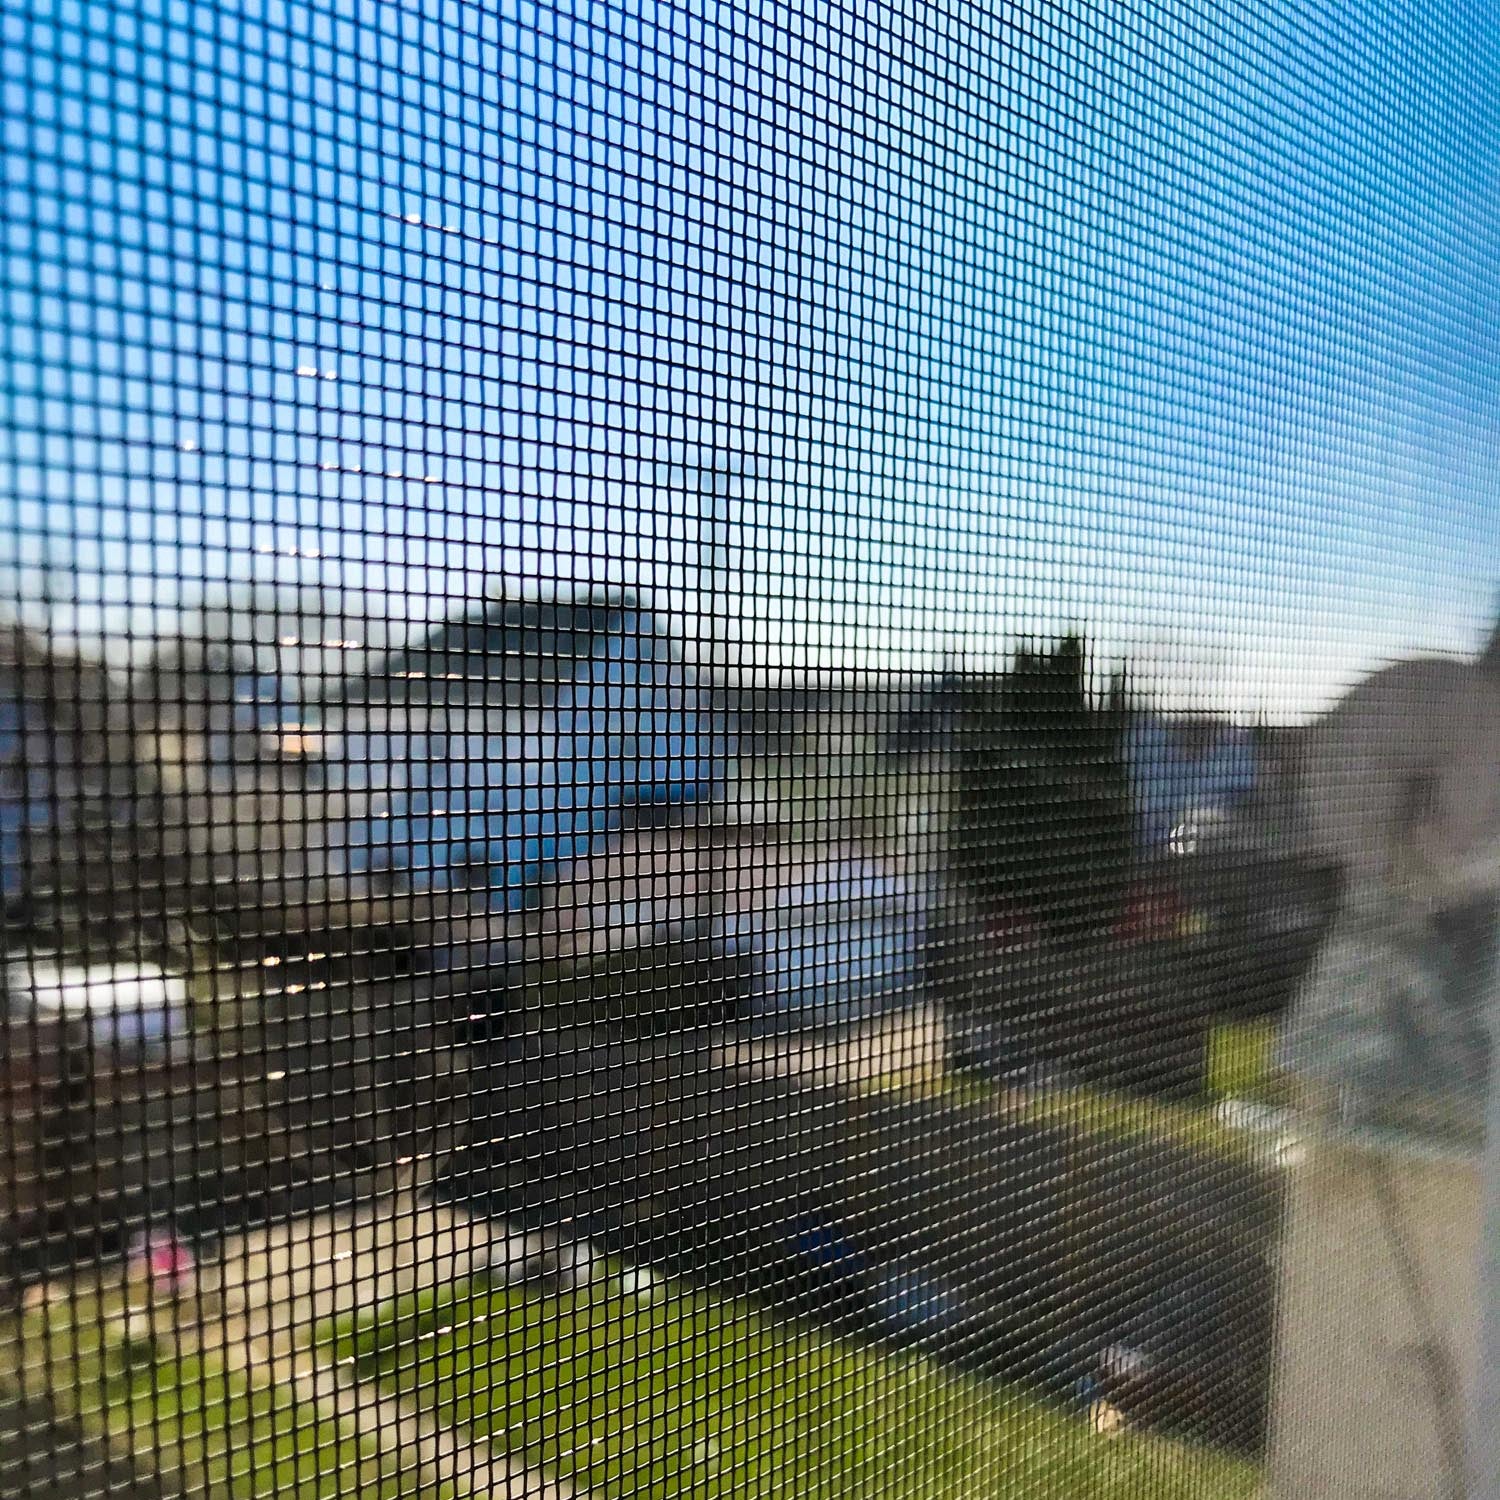 A window screen over a view of suburban backyards and homes